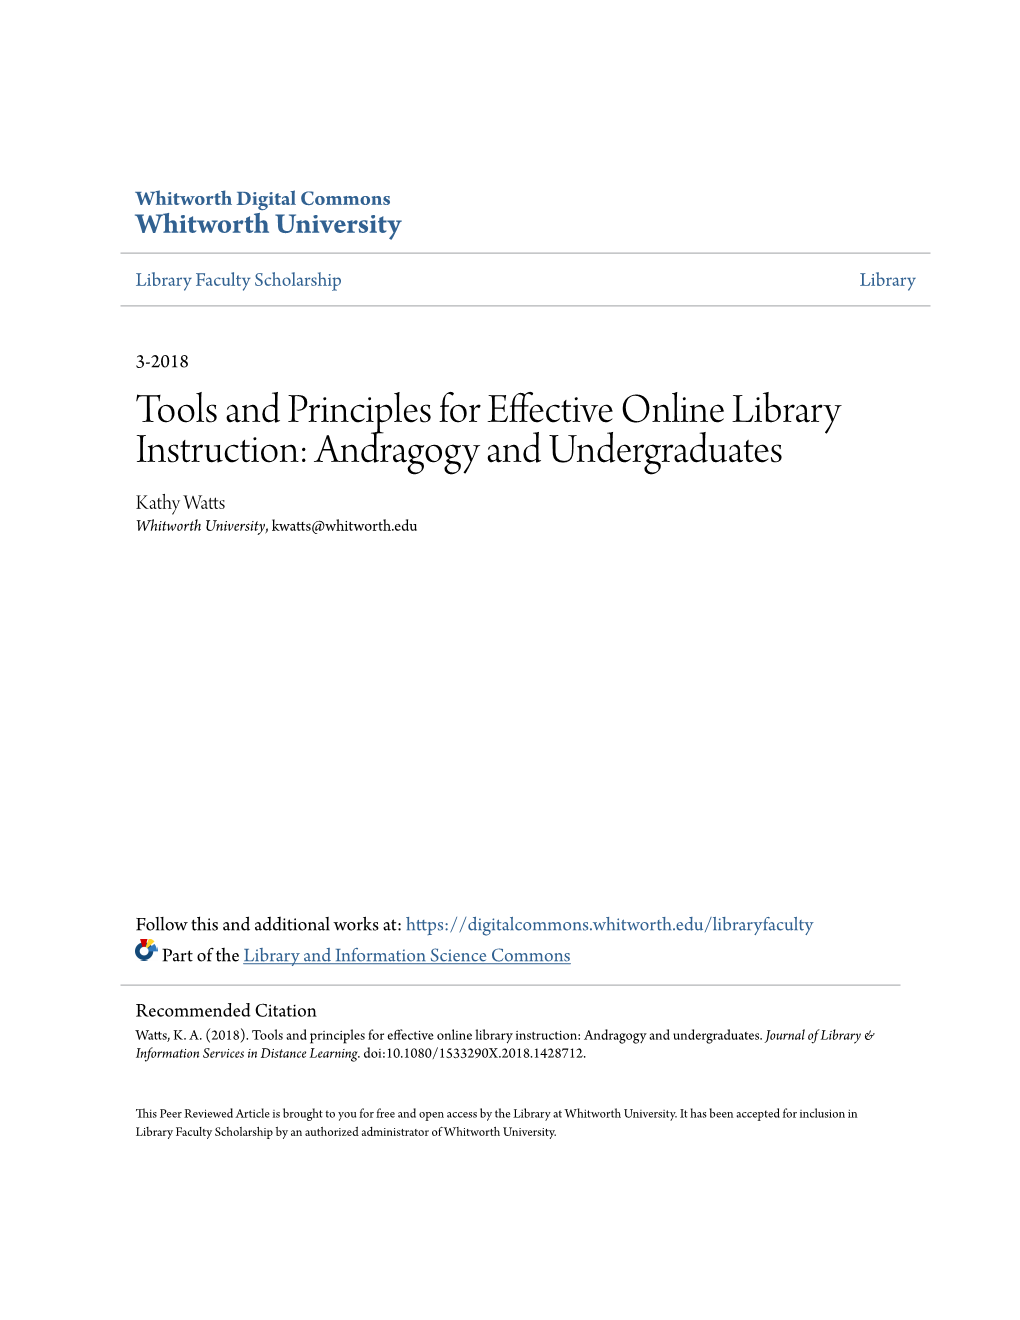 Tools and Principles for Effective Online Library Instruction: Andragogy and Undergraduates Kathy Watts Whitworth University, Kwatts@Whitworth.Edu